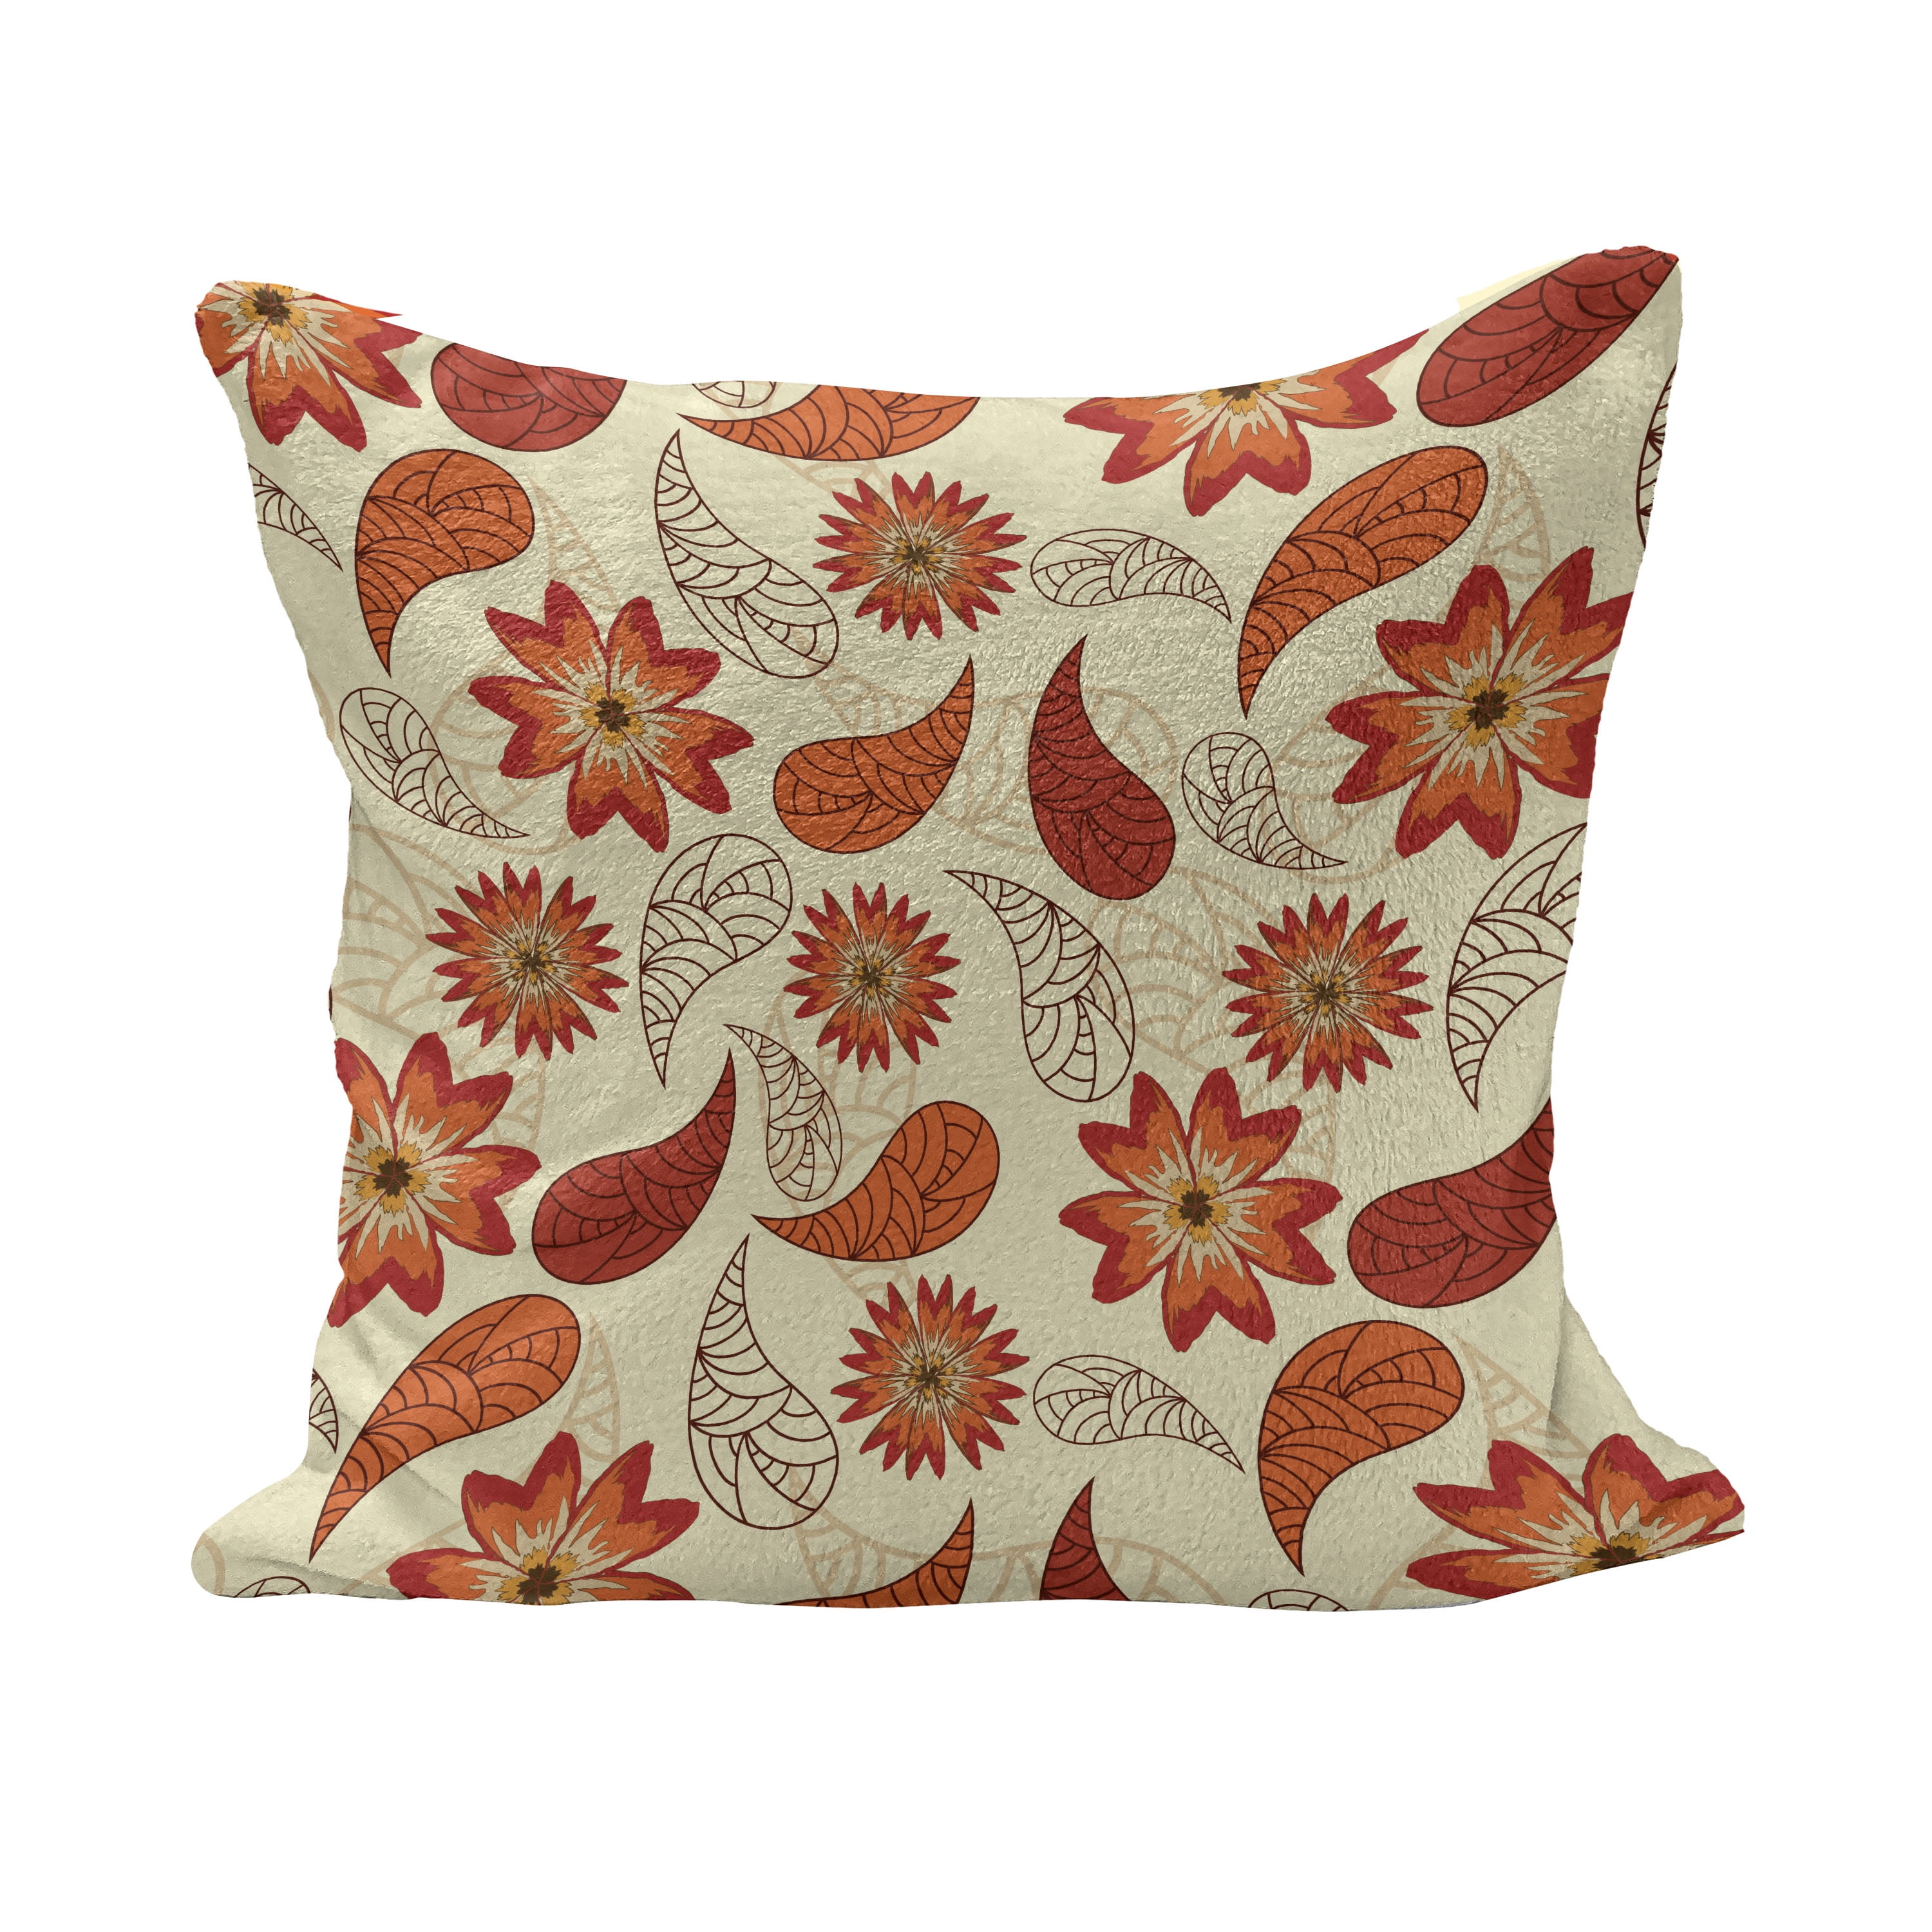 Cushion Covers made in Amber Orange Poppy Dita Zig Zag Fabric Throw Pillows Cream Envelope Backed Made in UK 16 with or without insert